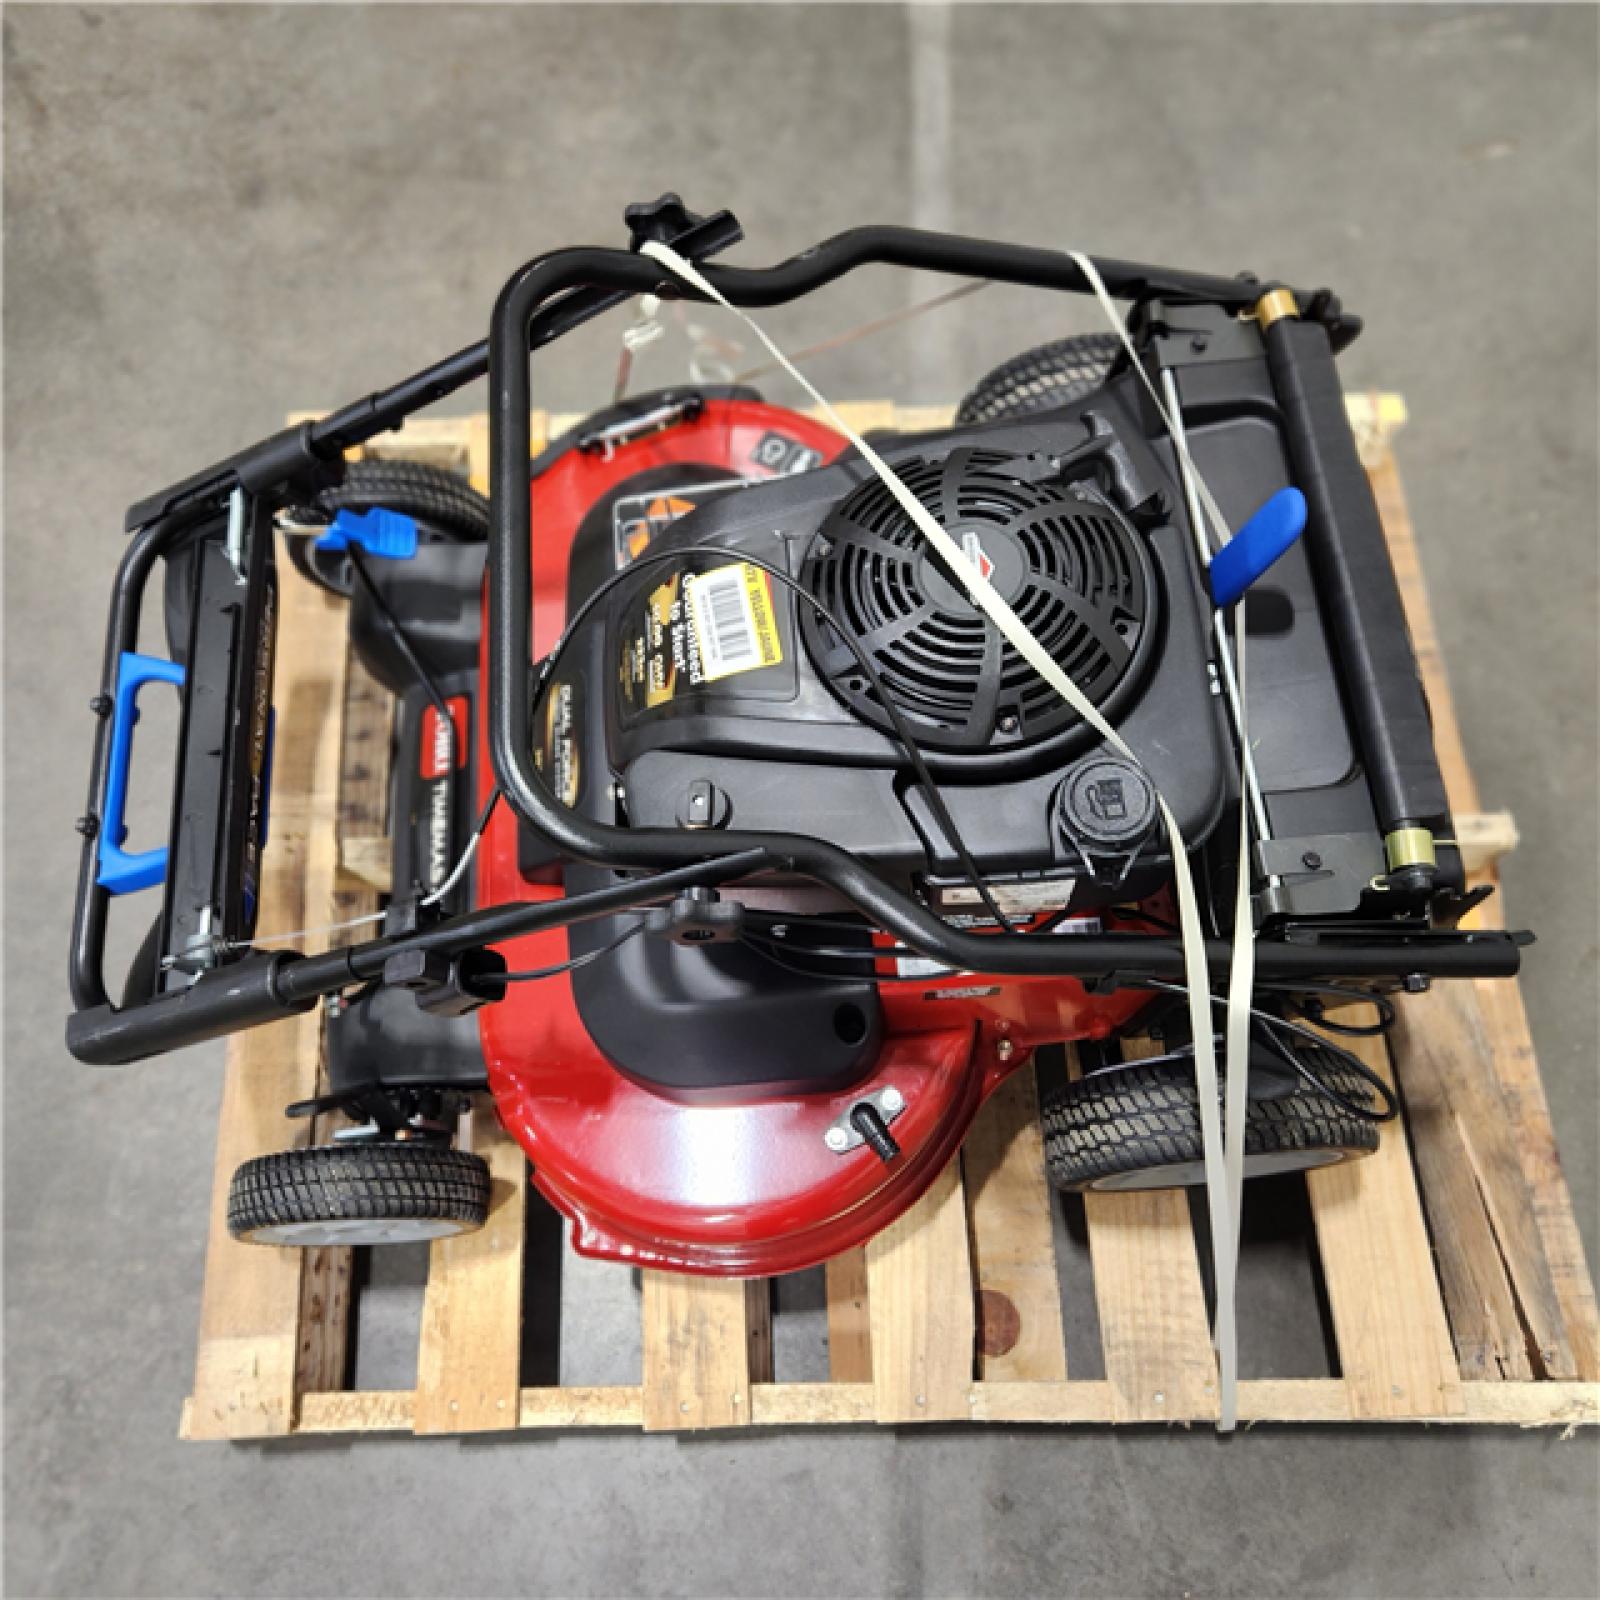 Dallas Location - As-Is Toro TimeMaster 30 in. Self-Propelled  Gas Lawn Mower